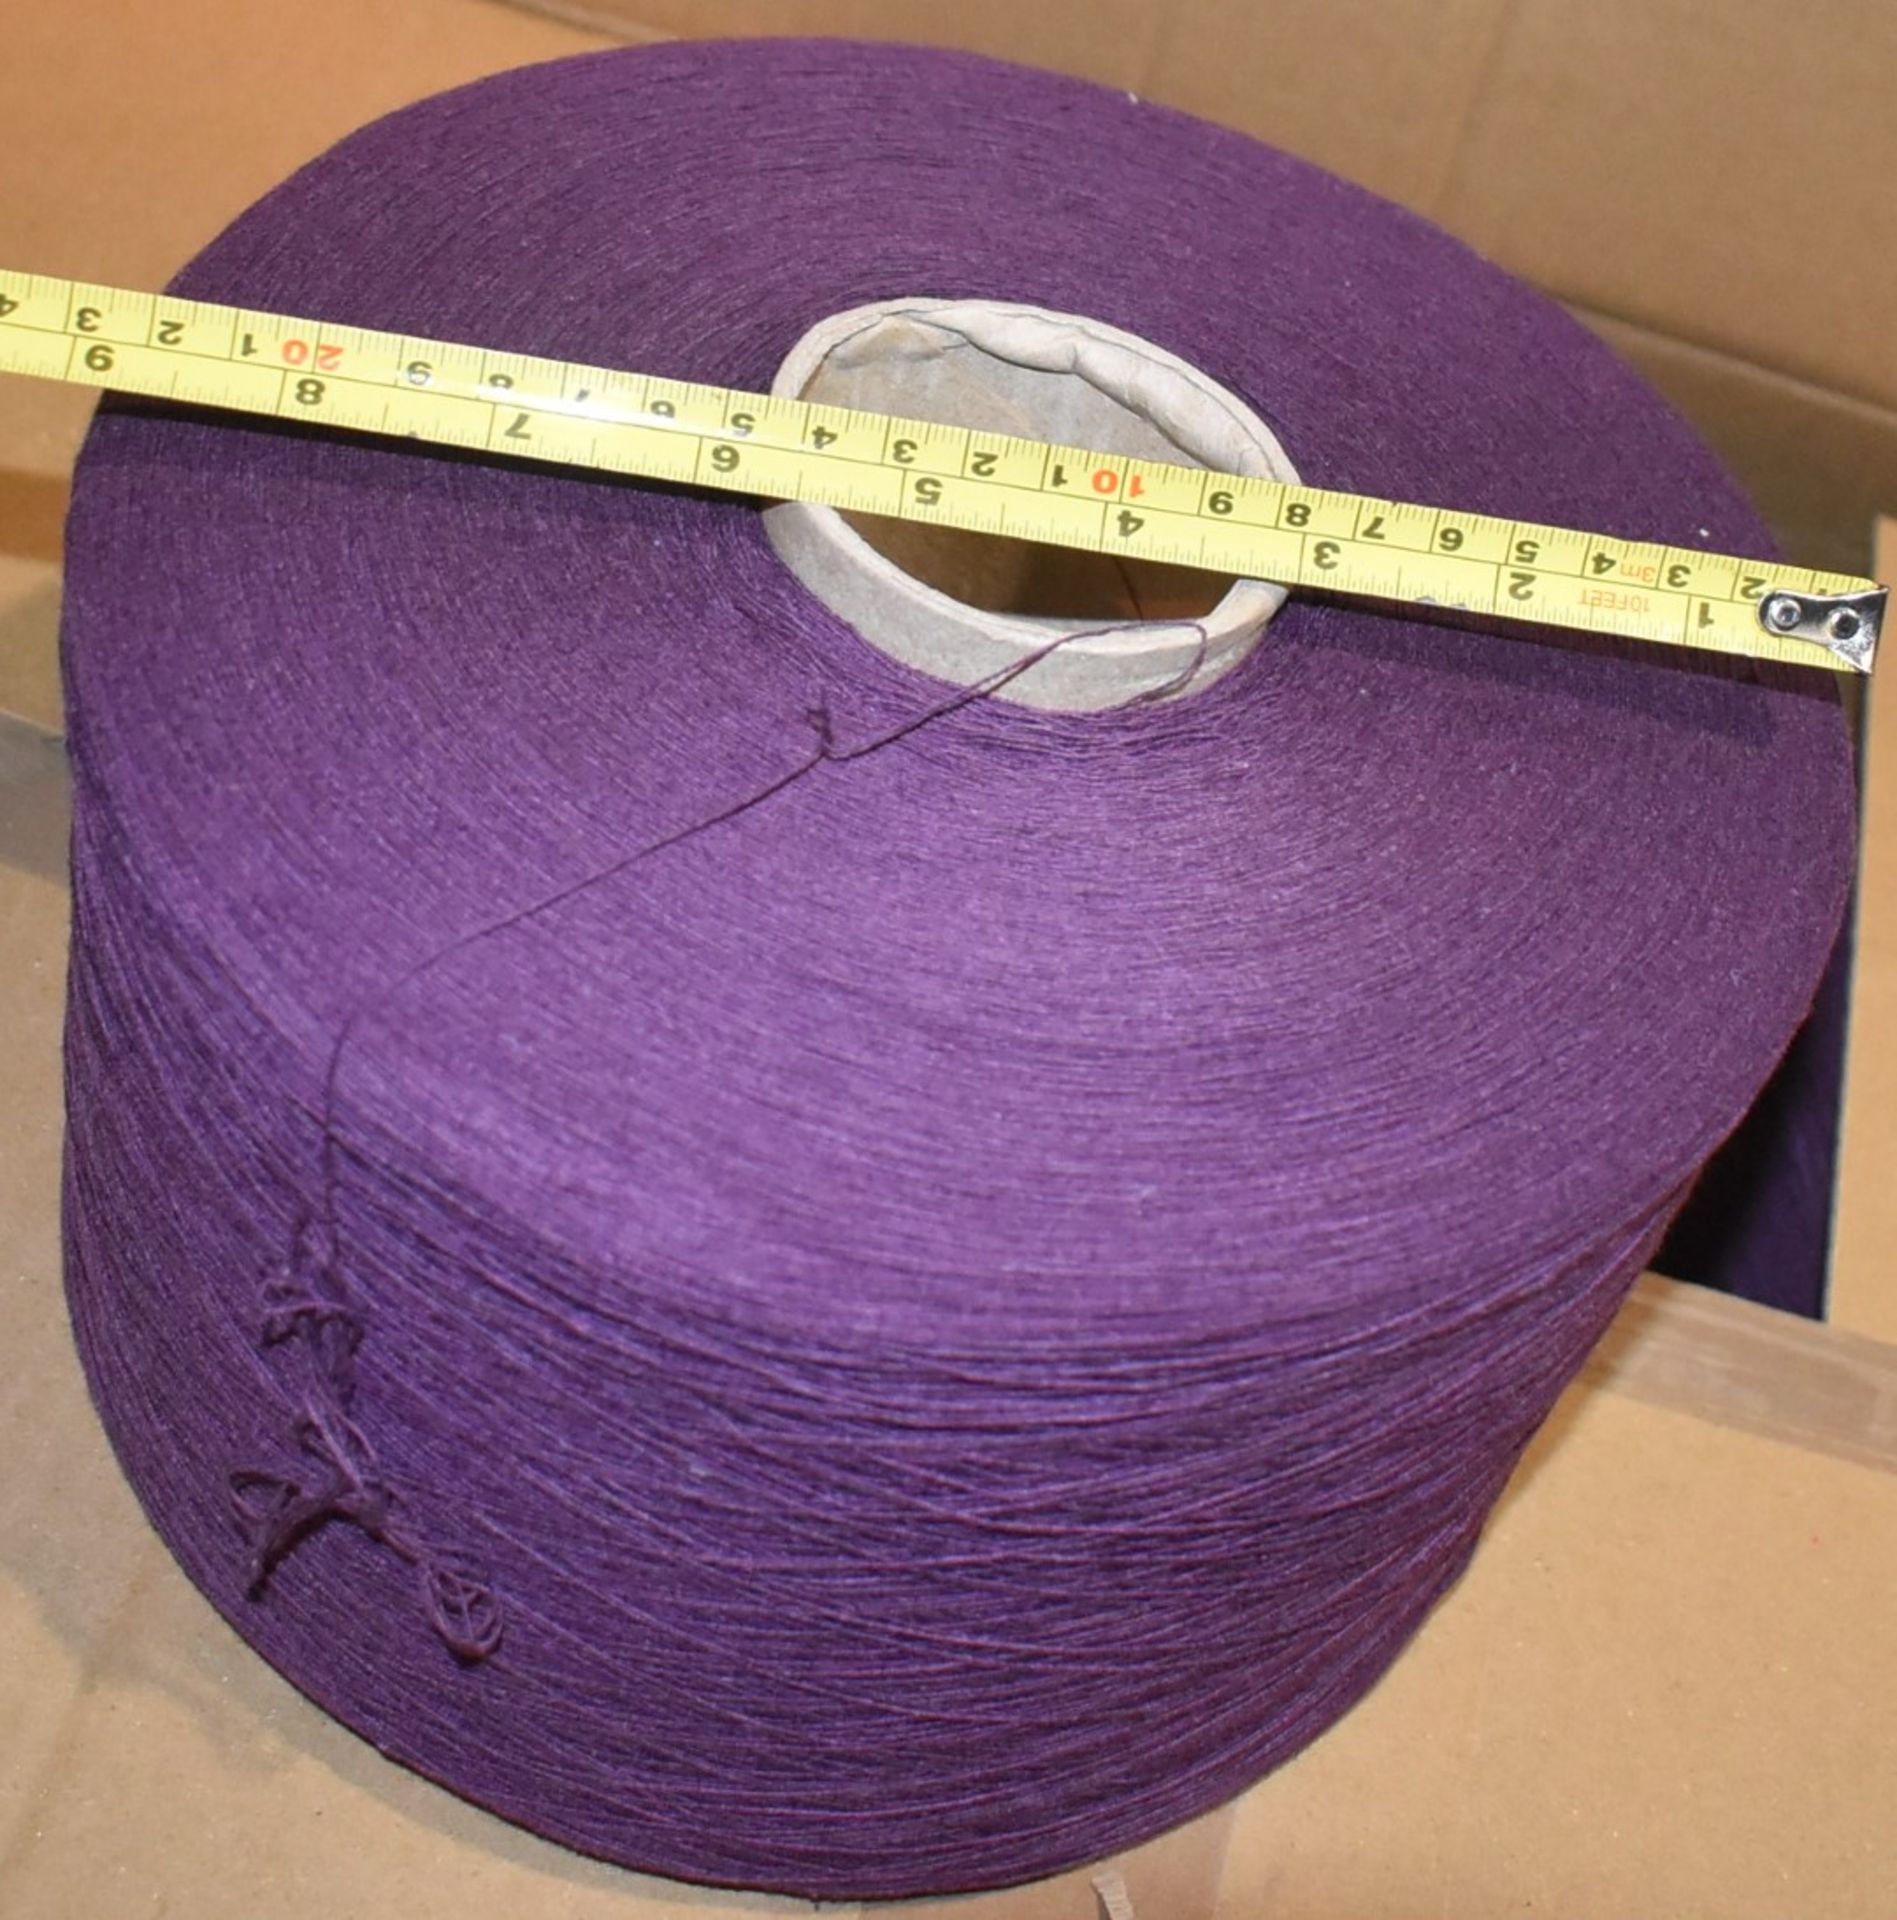 6 x Cones of 1/13 MicroCotton Knitting Yarn - Purple - Approx Weight: 2,300g - New Stock ABL Yarn - Image 7 of 9